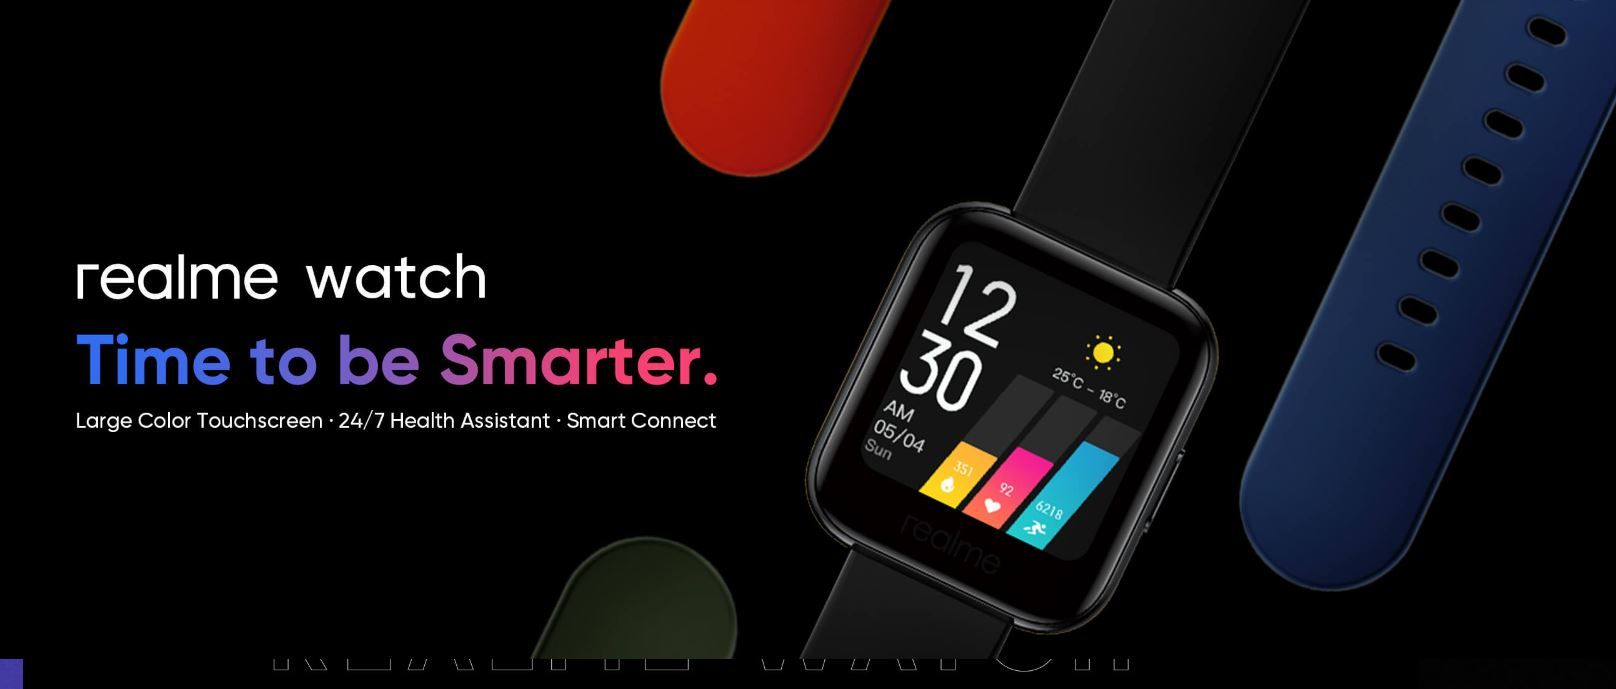 Realme Watch promotional poster 1